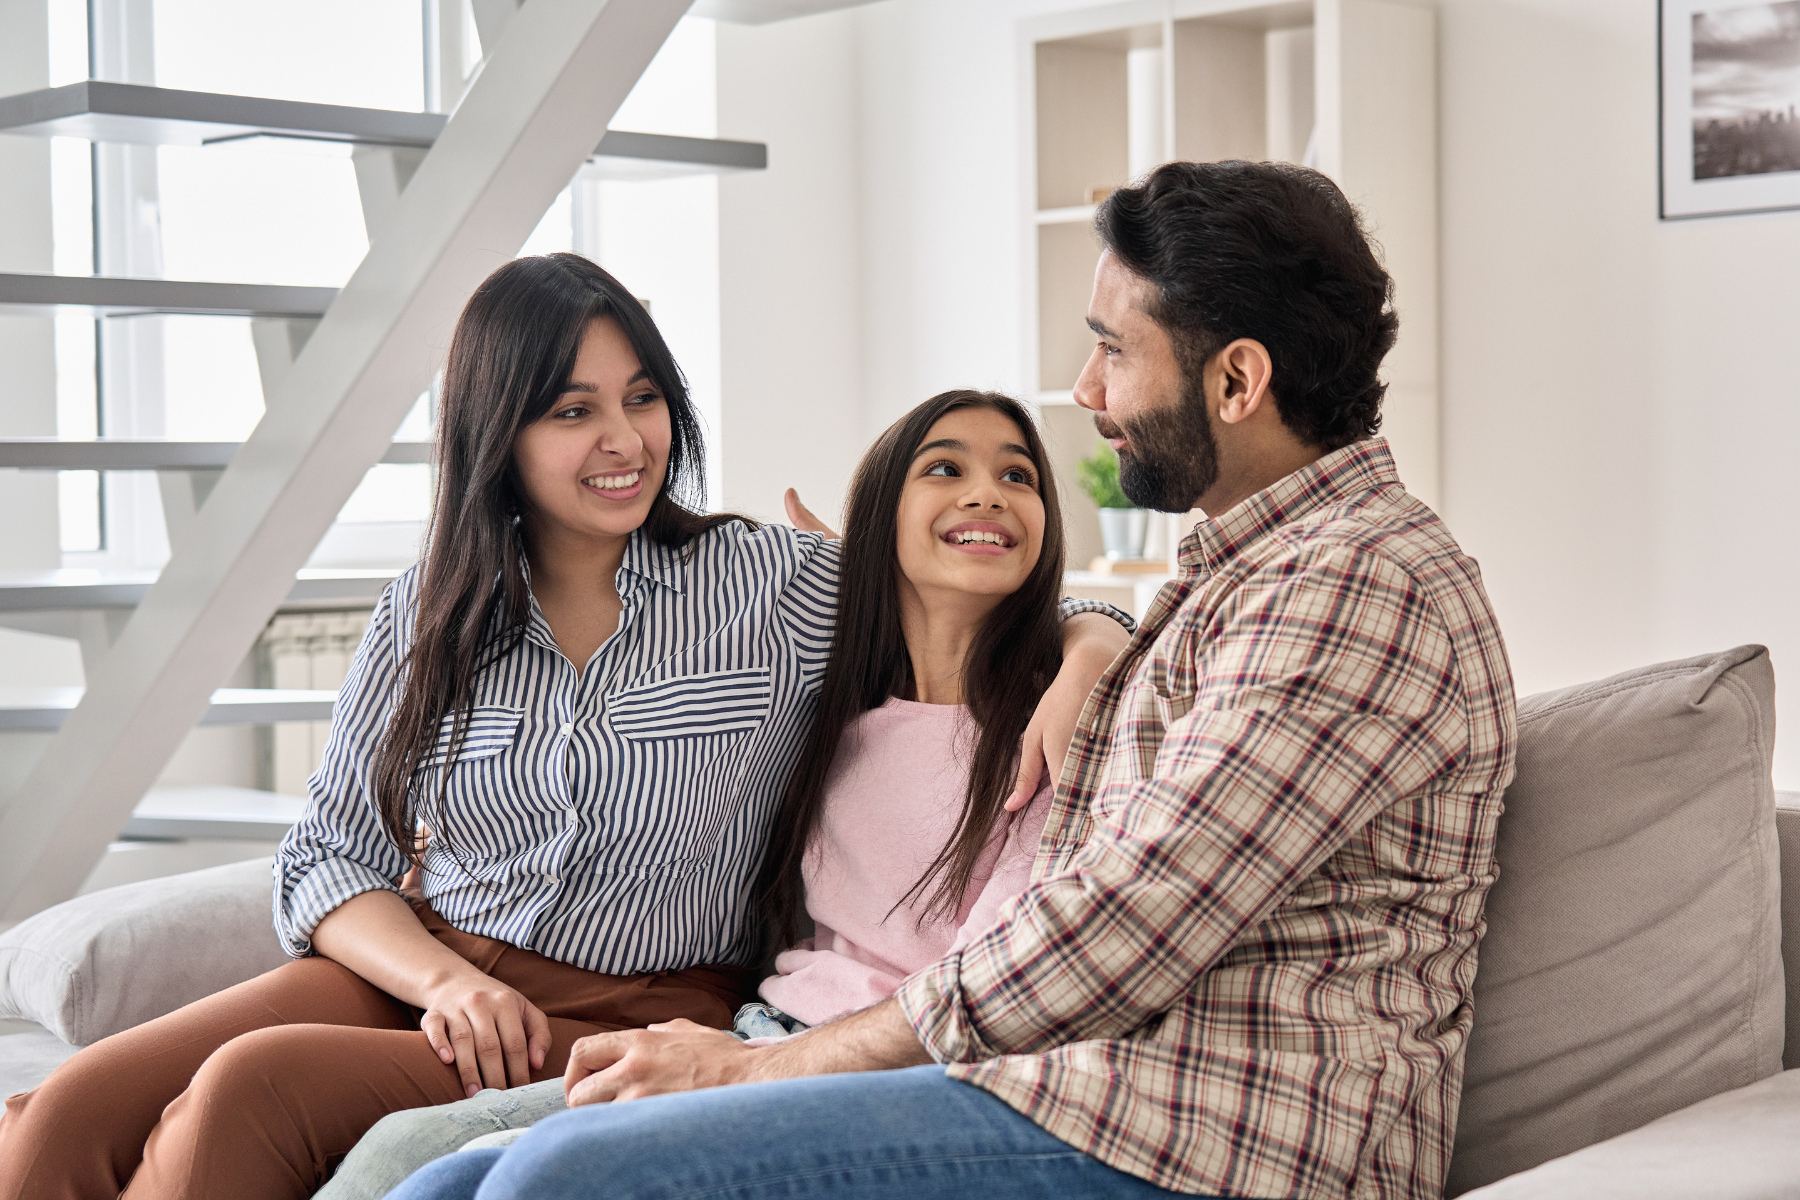 man and woman, sitting on the couch at home with their arms around a young tween girl, in conversation together